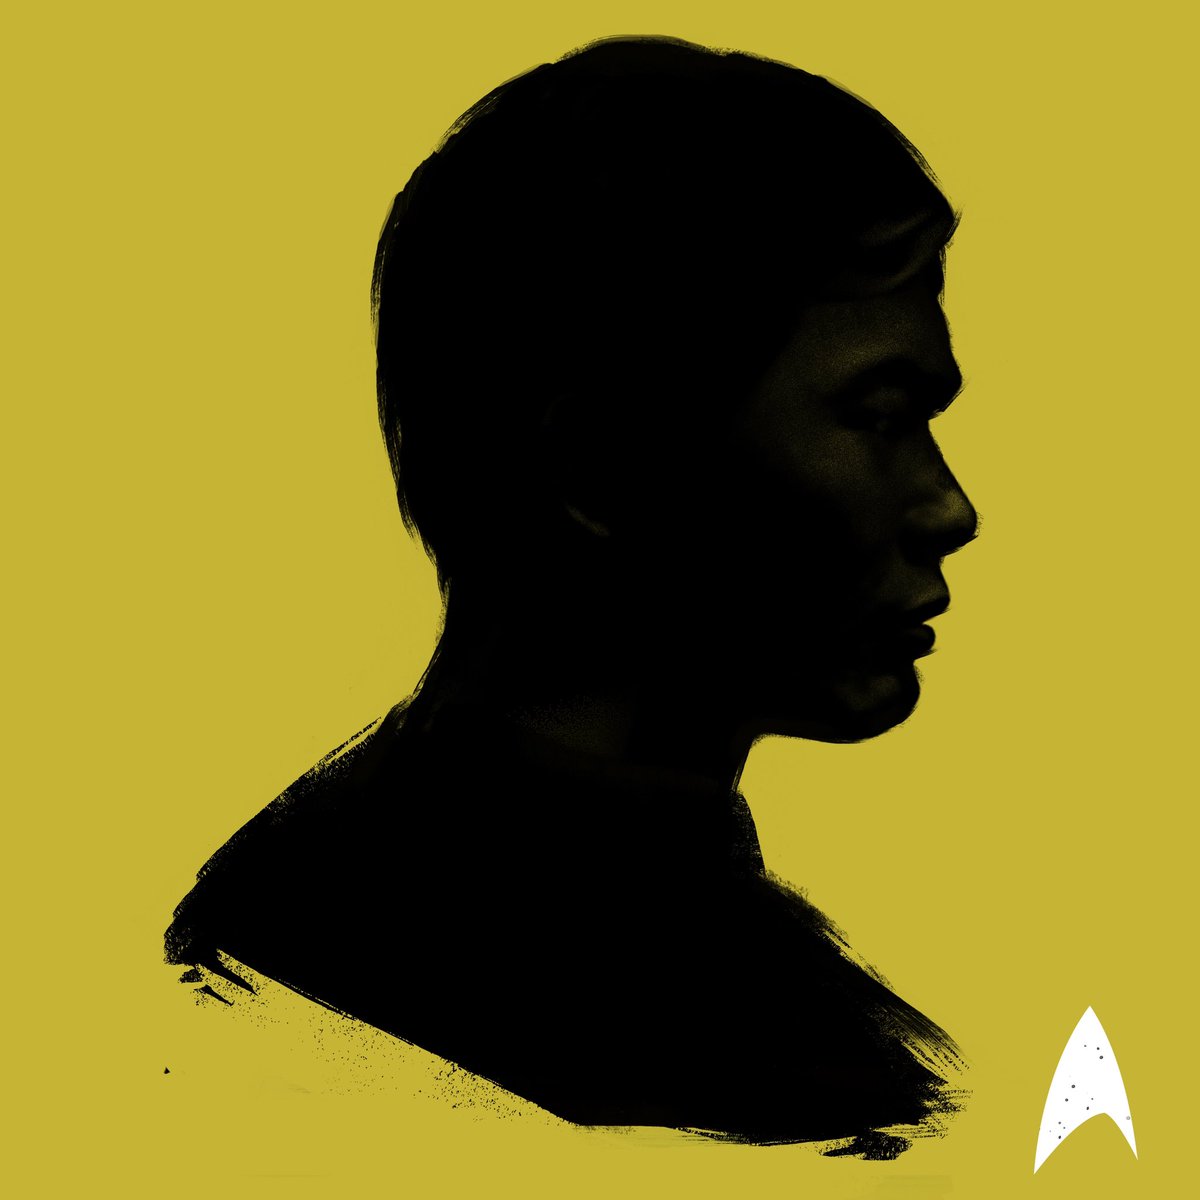 Let’s wish a very happy birthday to #StarTrek actor, Philanthropist & Icon @GeorgeTakei! Oh myyyy! ❤️🖖🏽 Star Trek Silhouette from a series of pieces I illustrated.